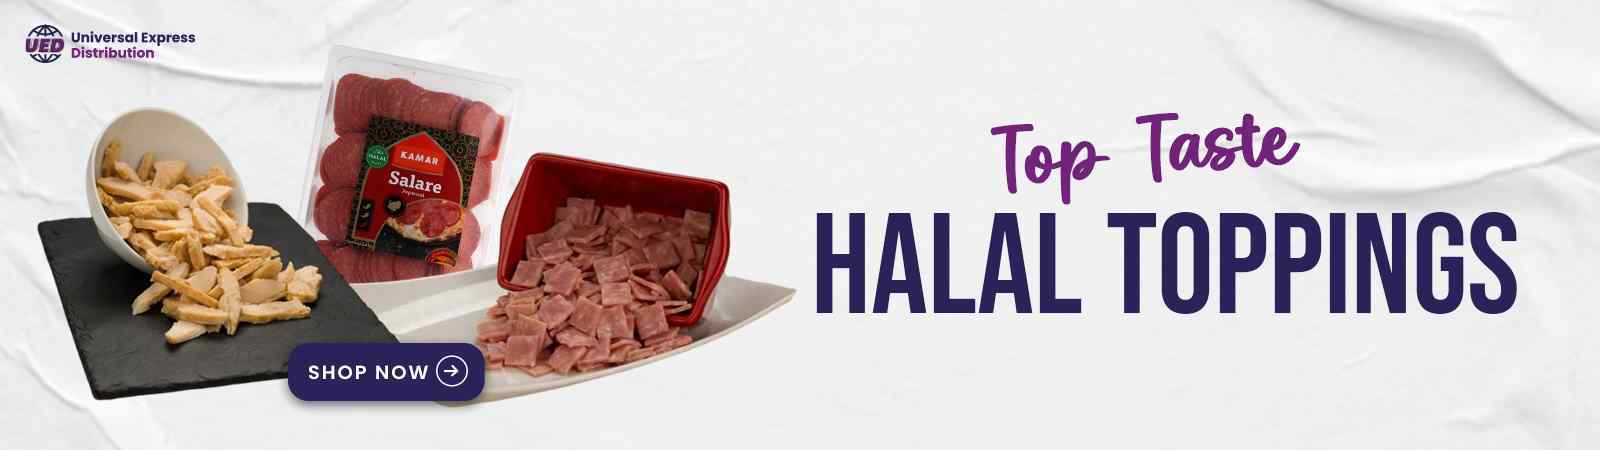 Halal Toppings